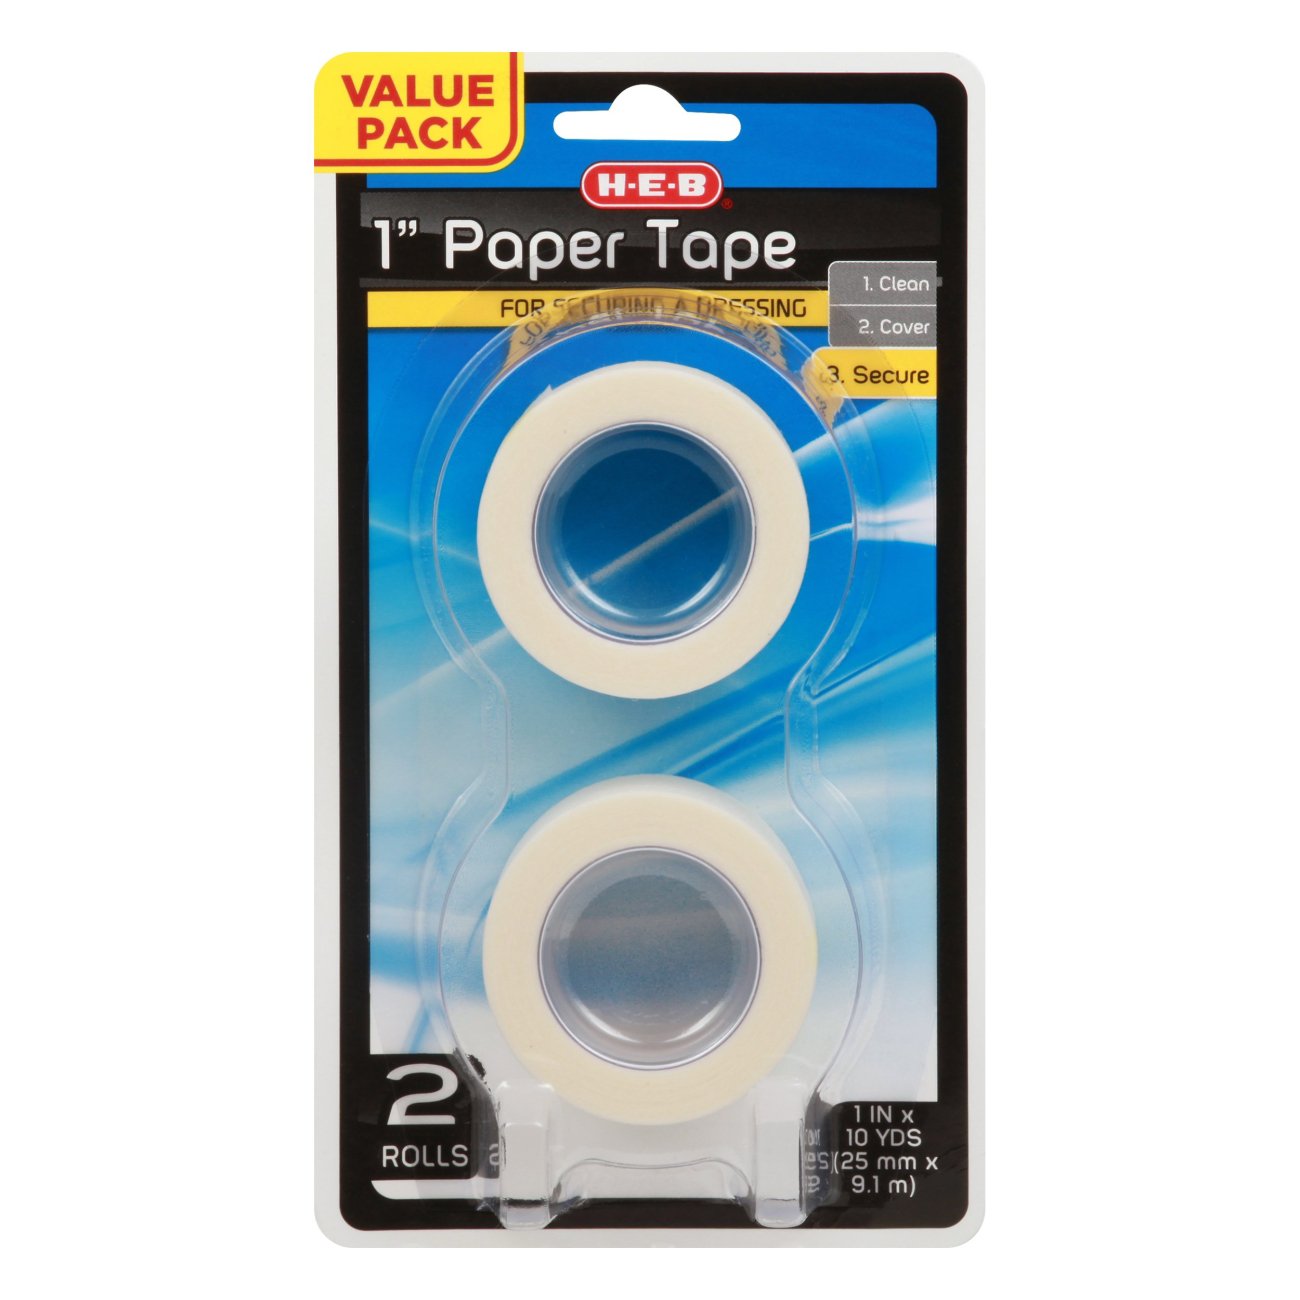 H-E-B Double Sided Tape - Shop Tape at H-E-B